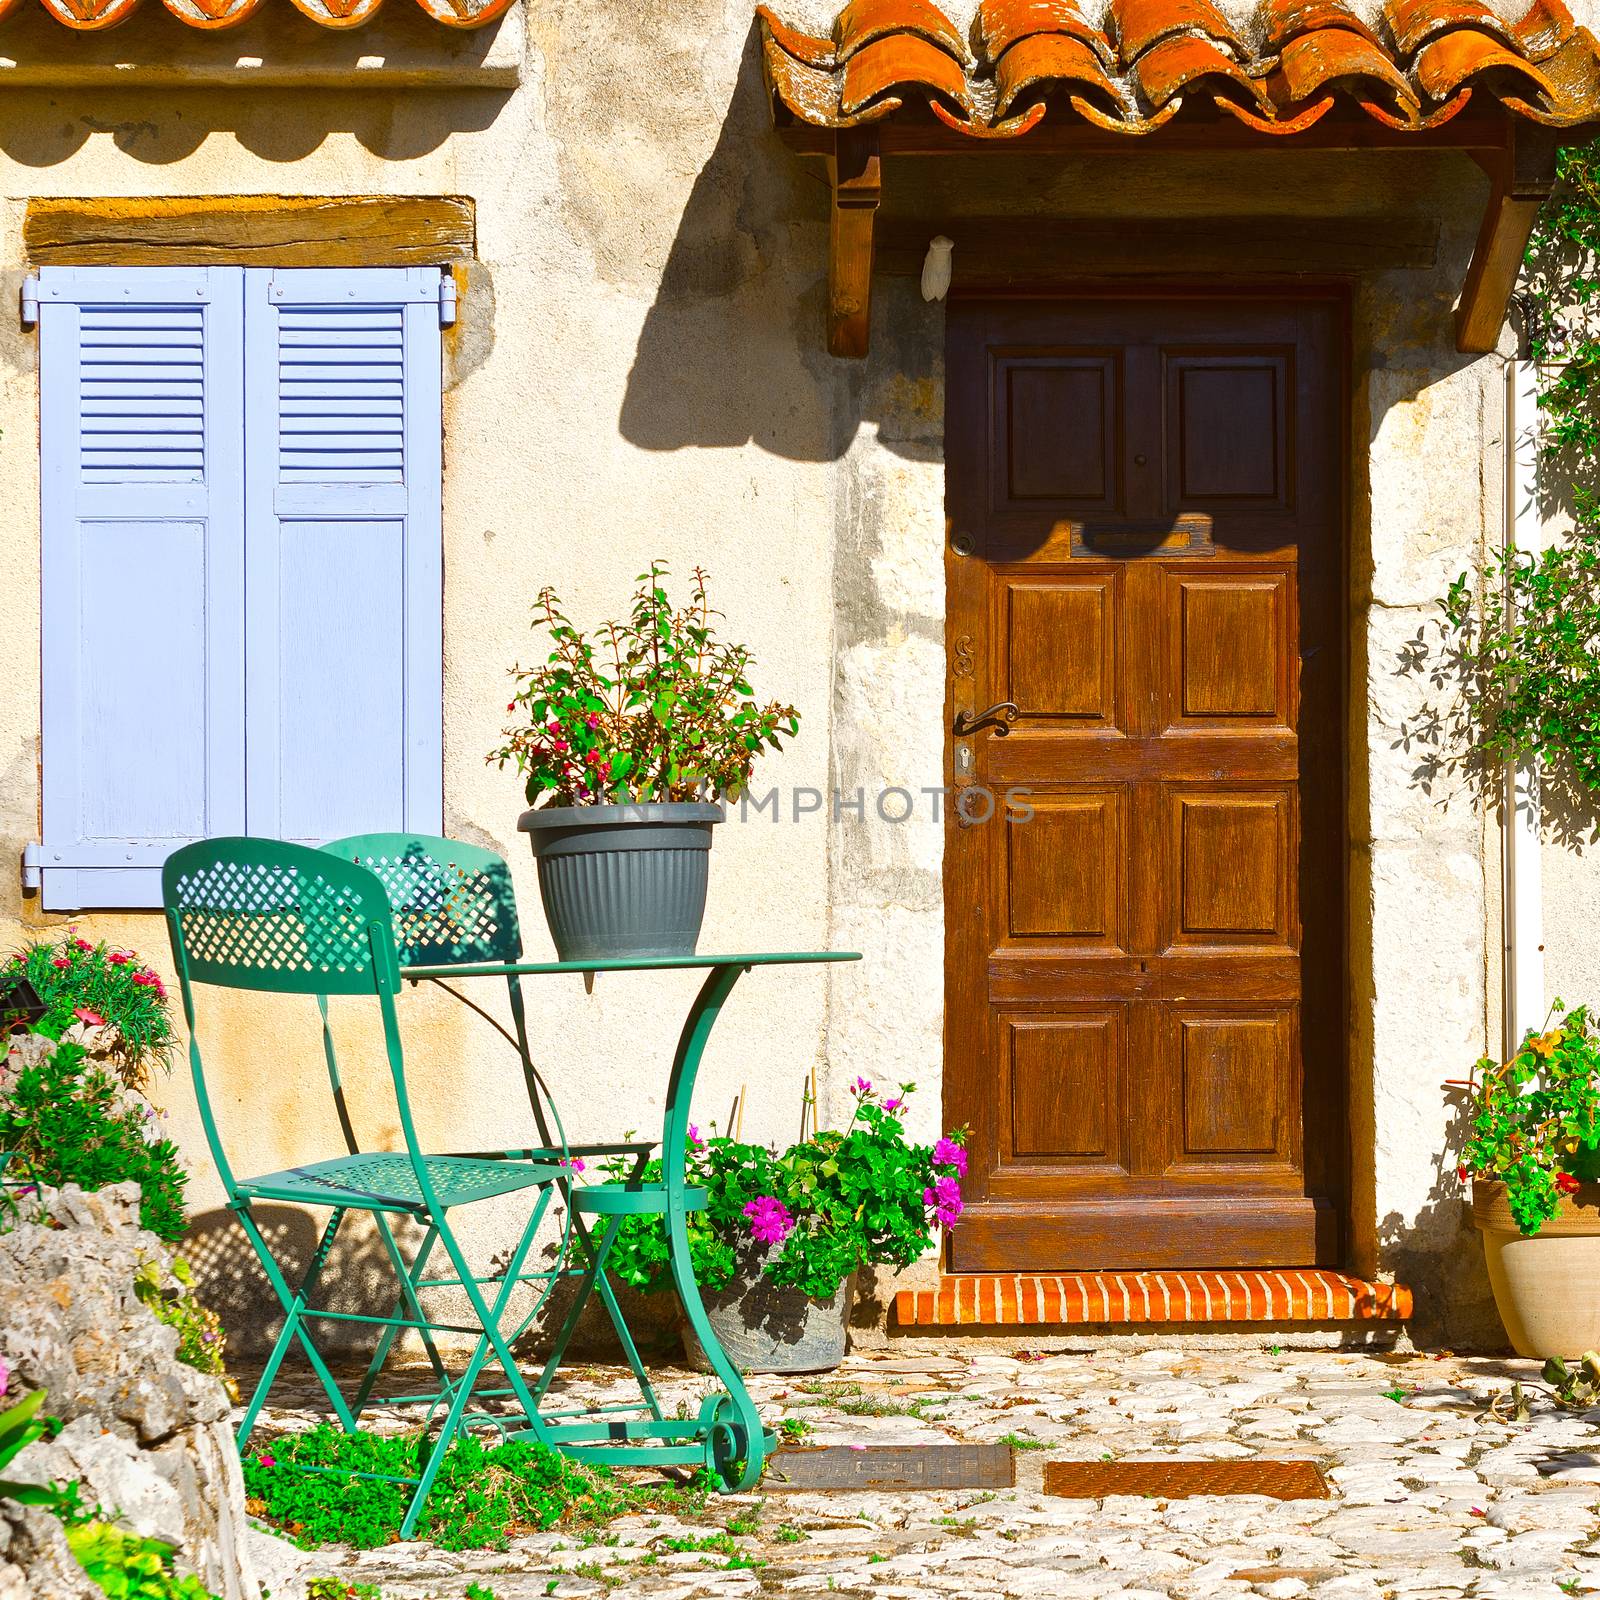  Facade of French House with Door and Window Decorated with Fresh Flowers